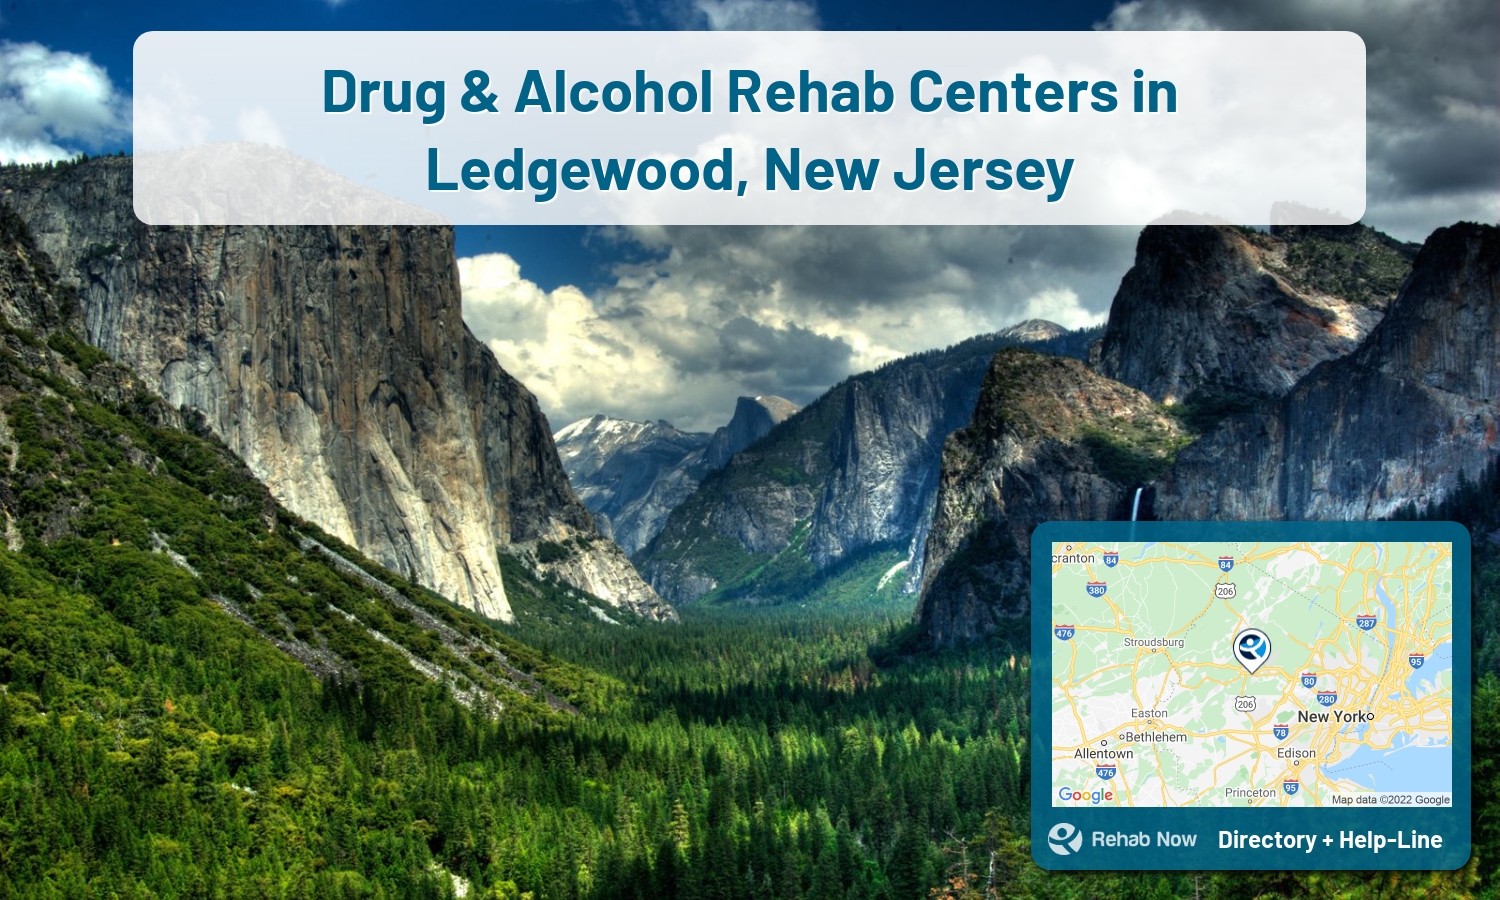 Let our expert counselors help find the best addiction treatment in Ledgewood, New Jersey now with a free call to our hotline.